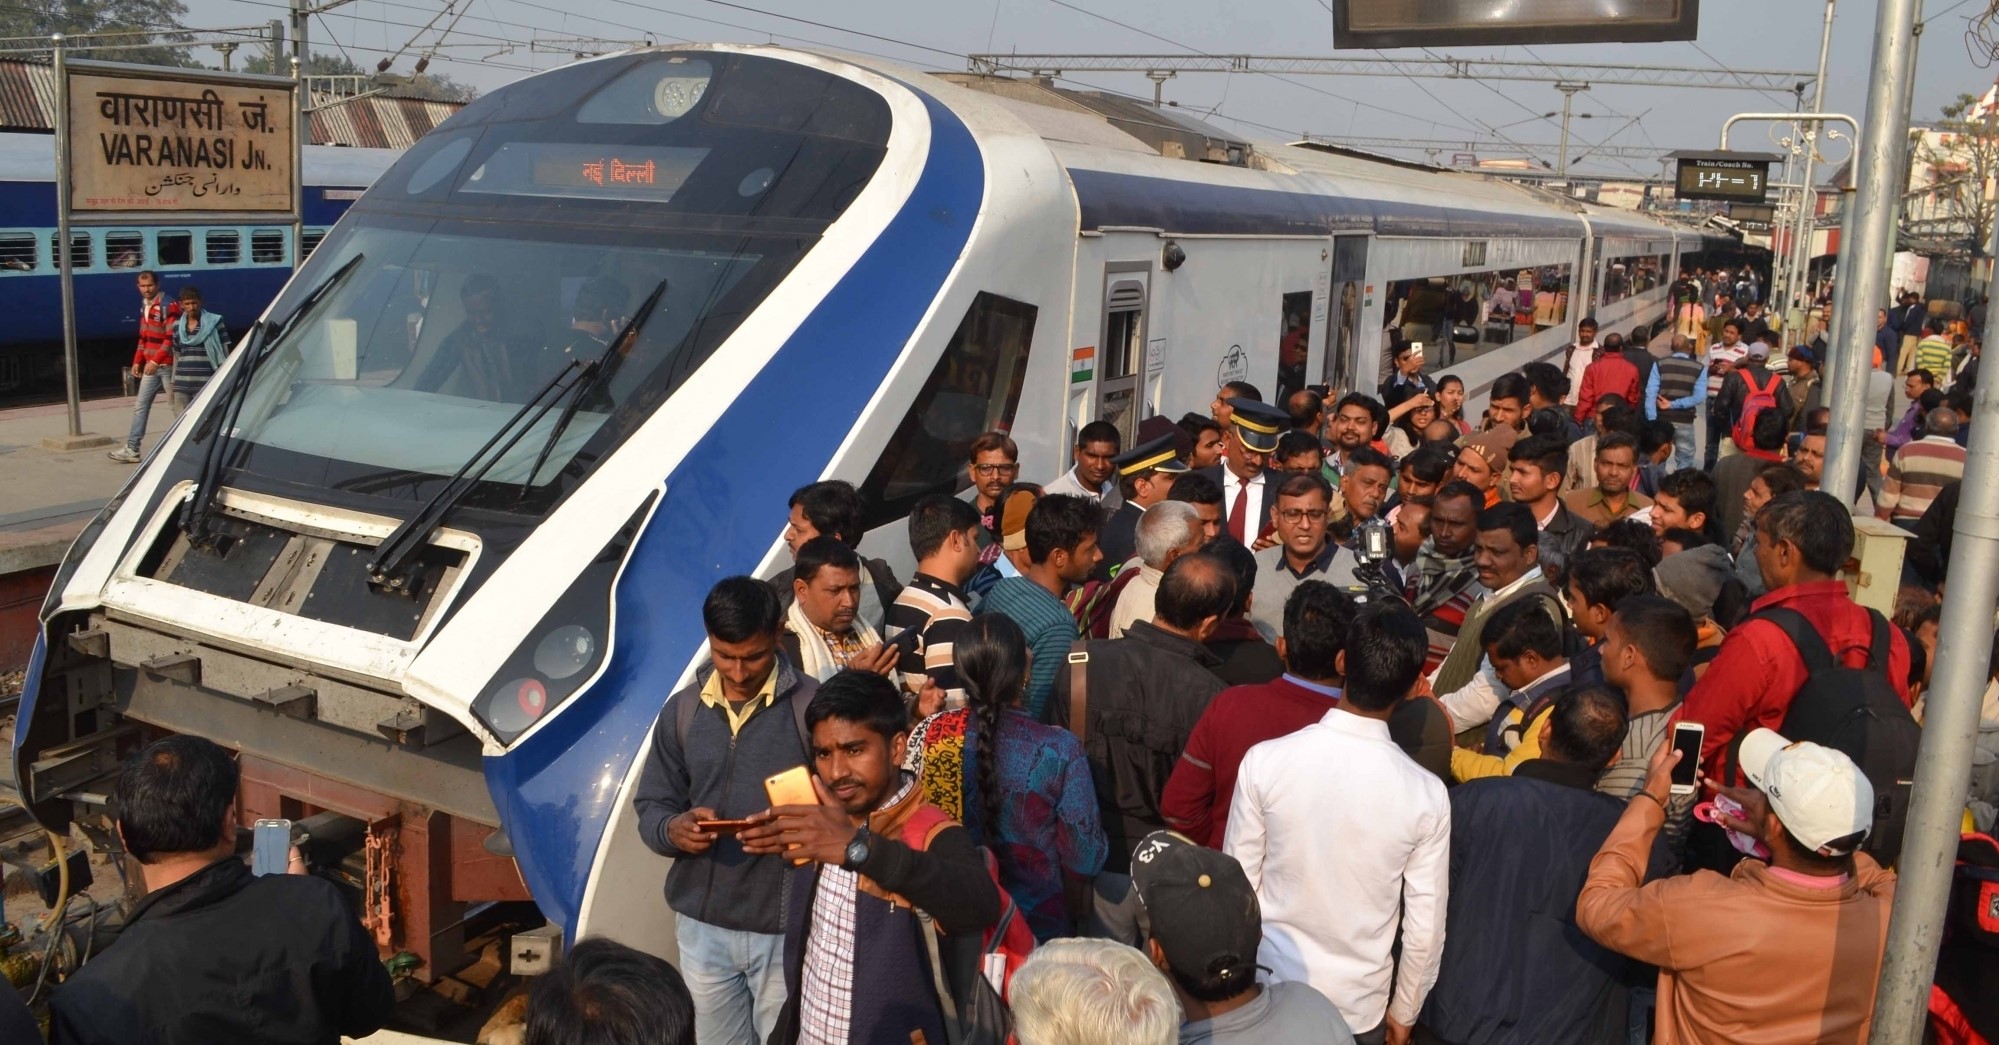 Bottle crushers, deep freezer, revolving seats among many features in Vande Bharat Express